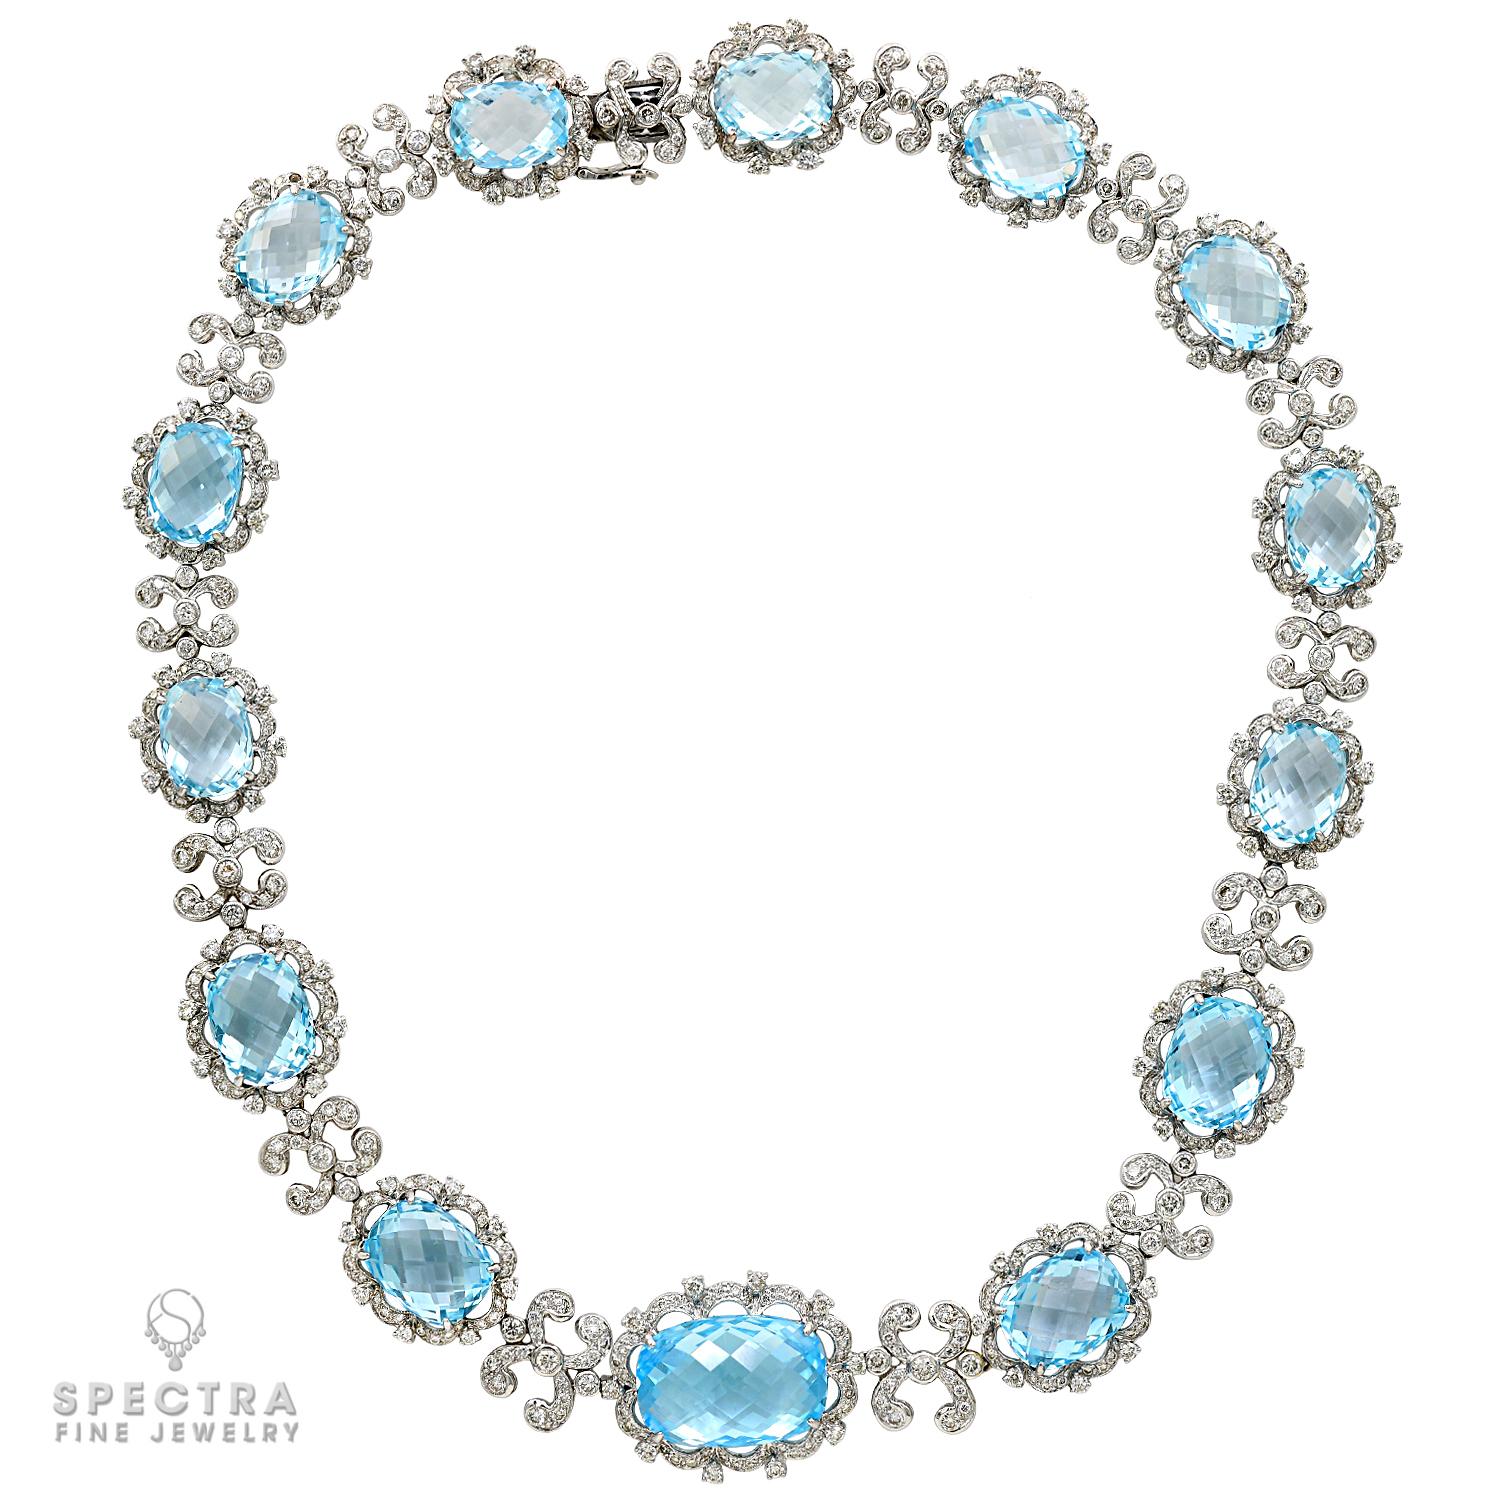 The Modern Blue Topaz Diamond 18K White Gold Necklace is a stunning piece of jewelry designed to add elegance and sophistication to any outfit. The necklace is crafted from 18K white gold, which gives it a lustrous and polished finish. The weight of